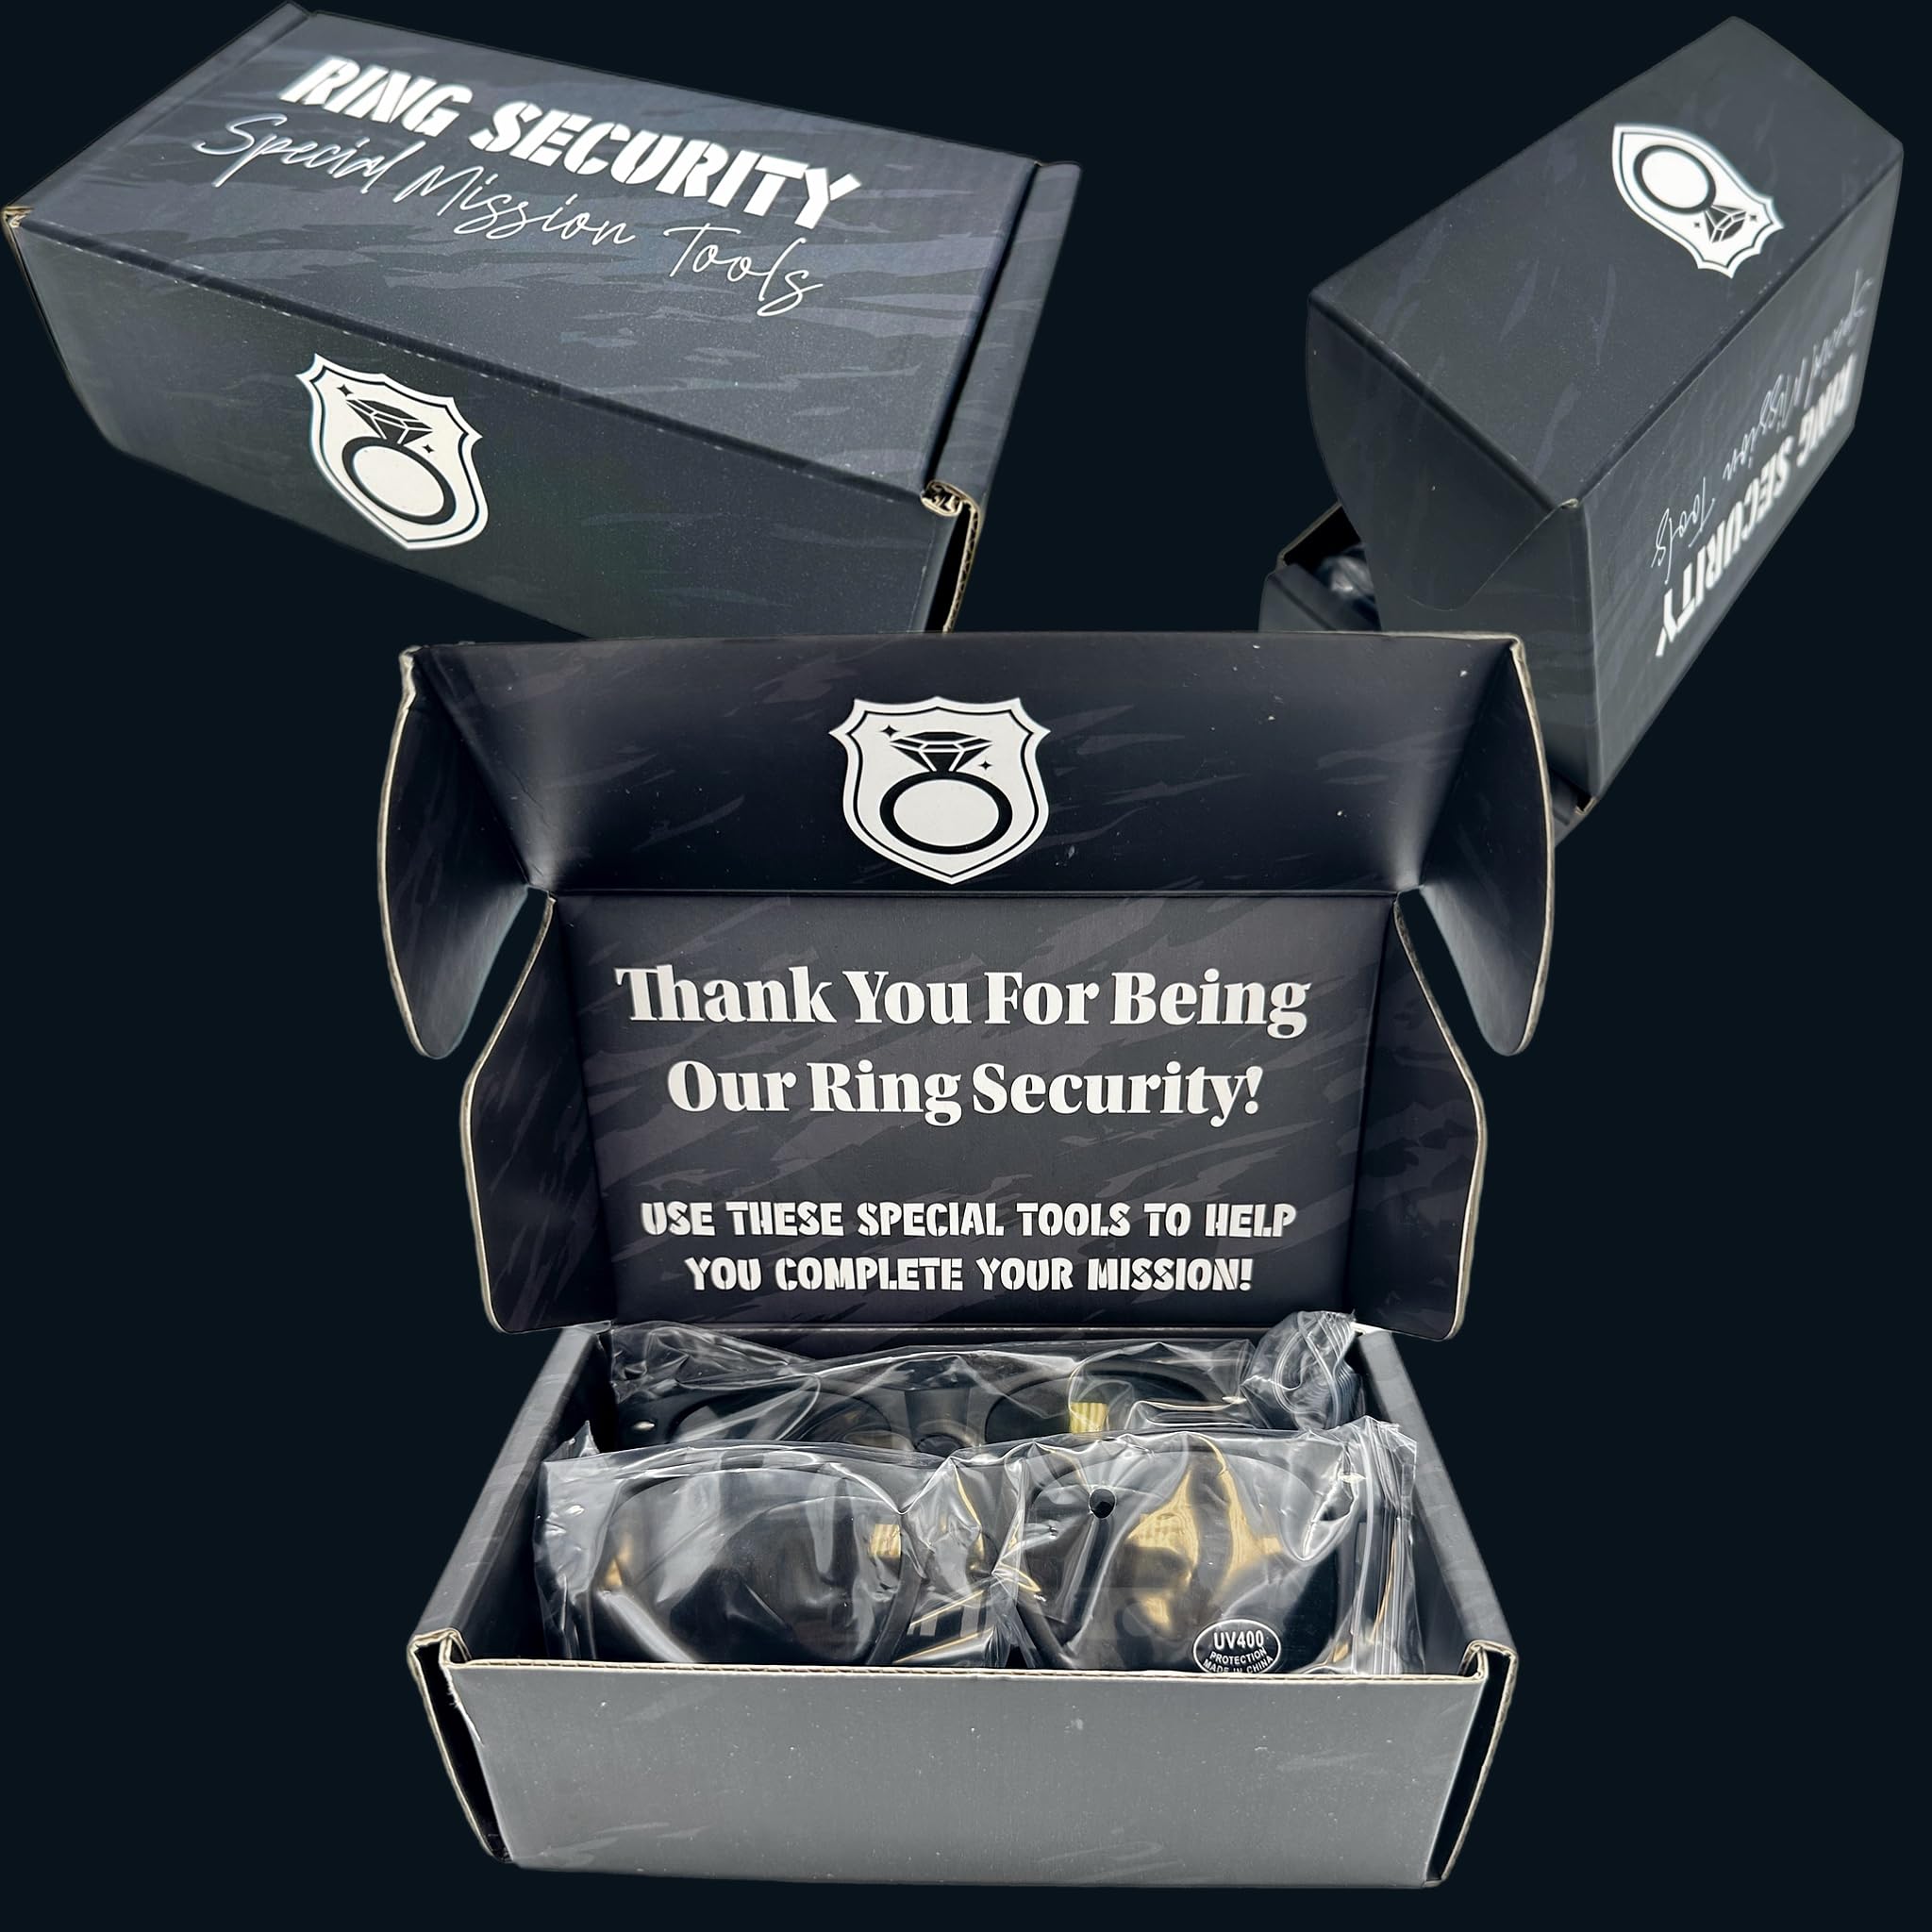 Ring Bearer Proposal Gift Box. A Gift for Wedding Ring Security. One Kit for 1 Ring Boy with 2 Different Size Sunglasses. (Tools)